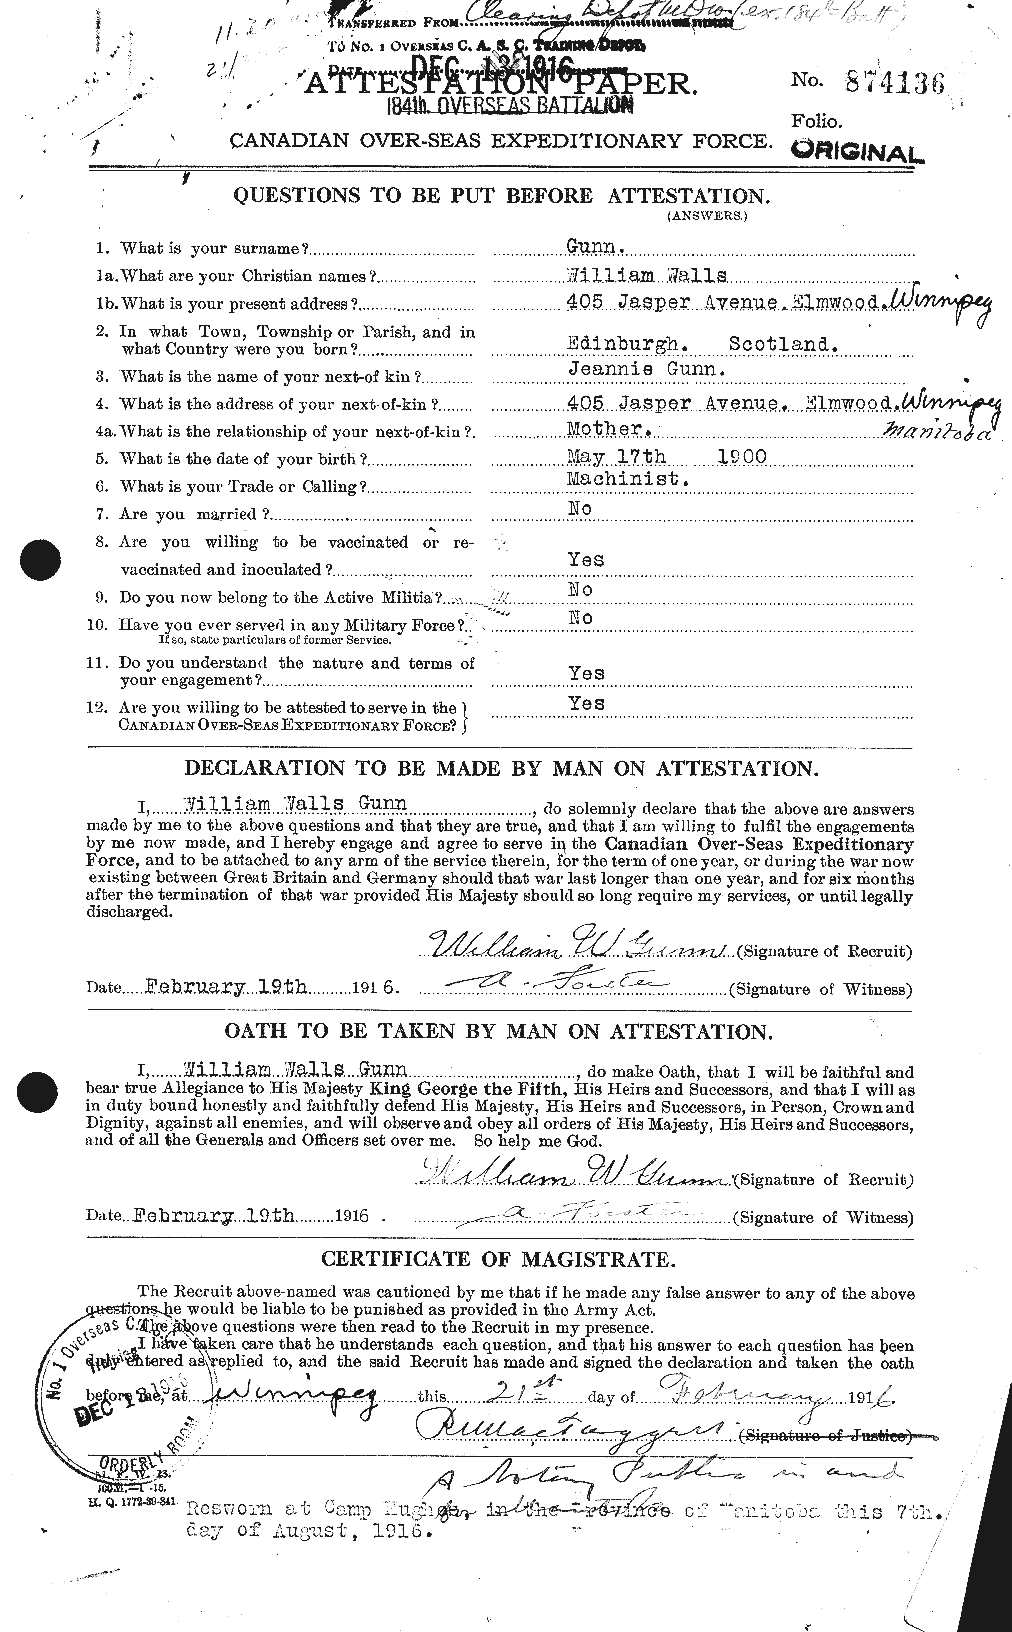 Personnel Records of the First World War - CEF 369378a